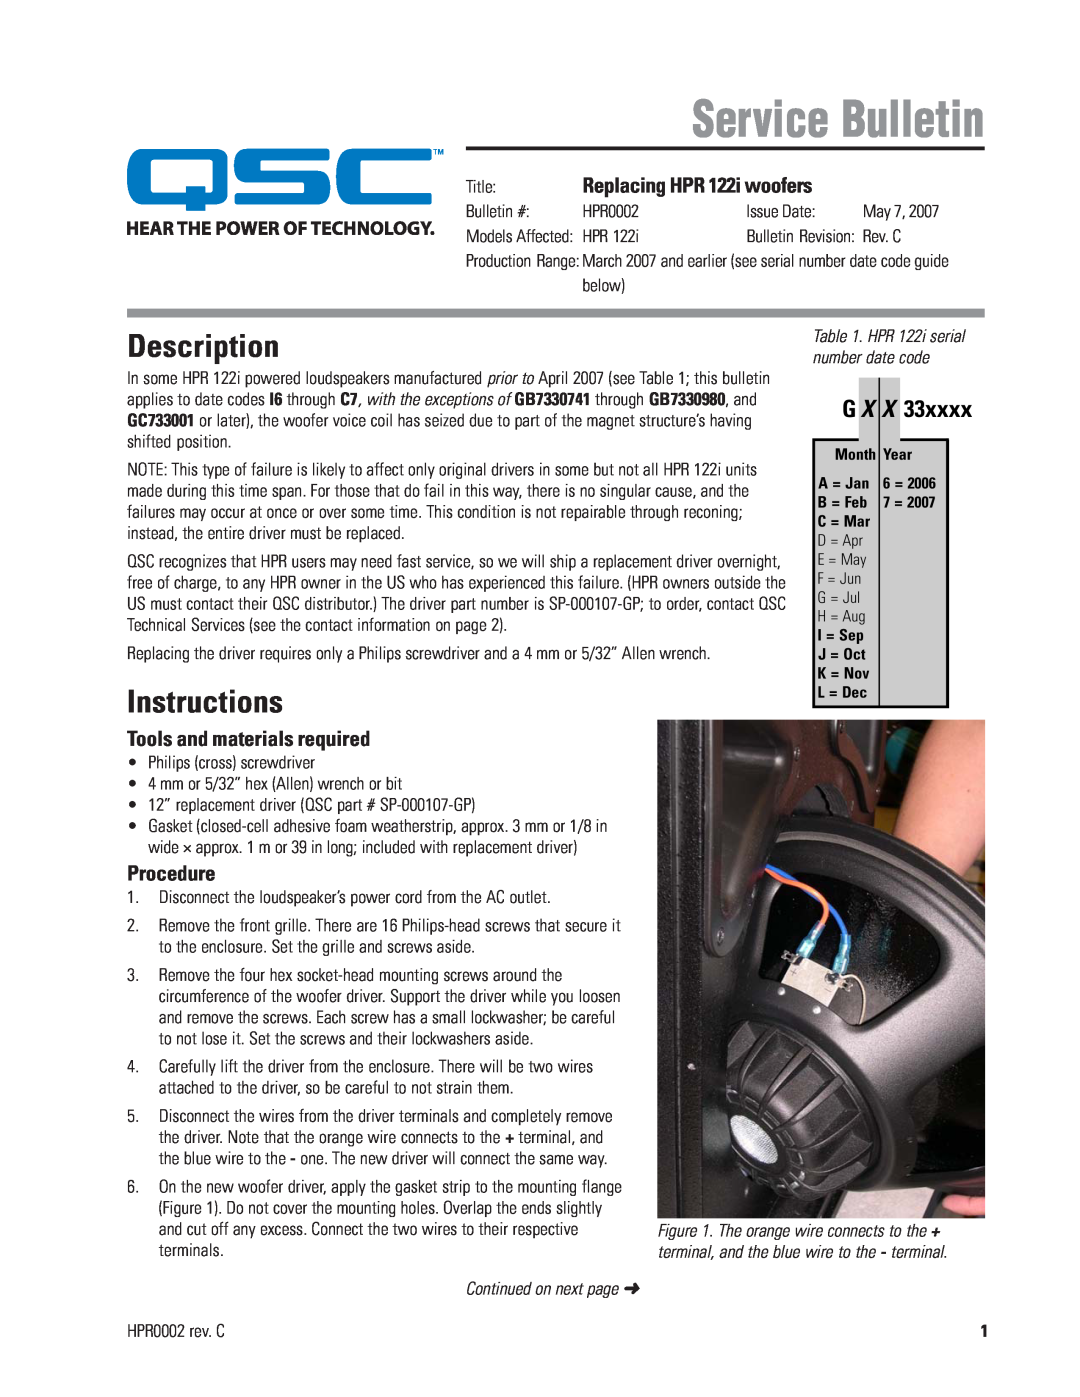 QSC Audio HPR0002 manual Description, Instructions, Continued on next page, Service Bulletin, Replacing HPR 122i woofers 